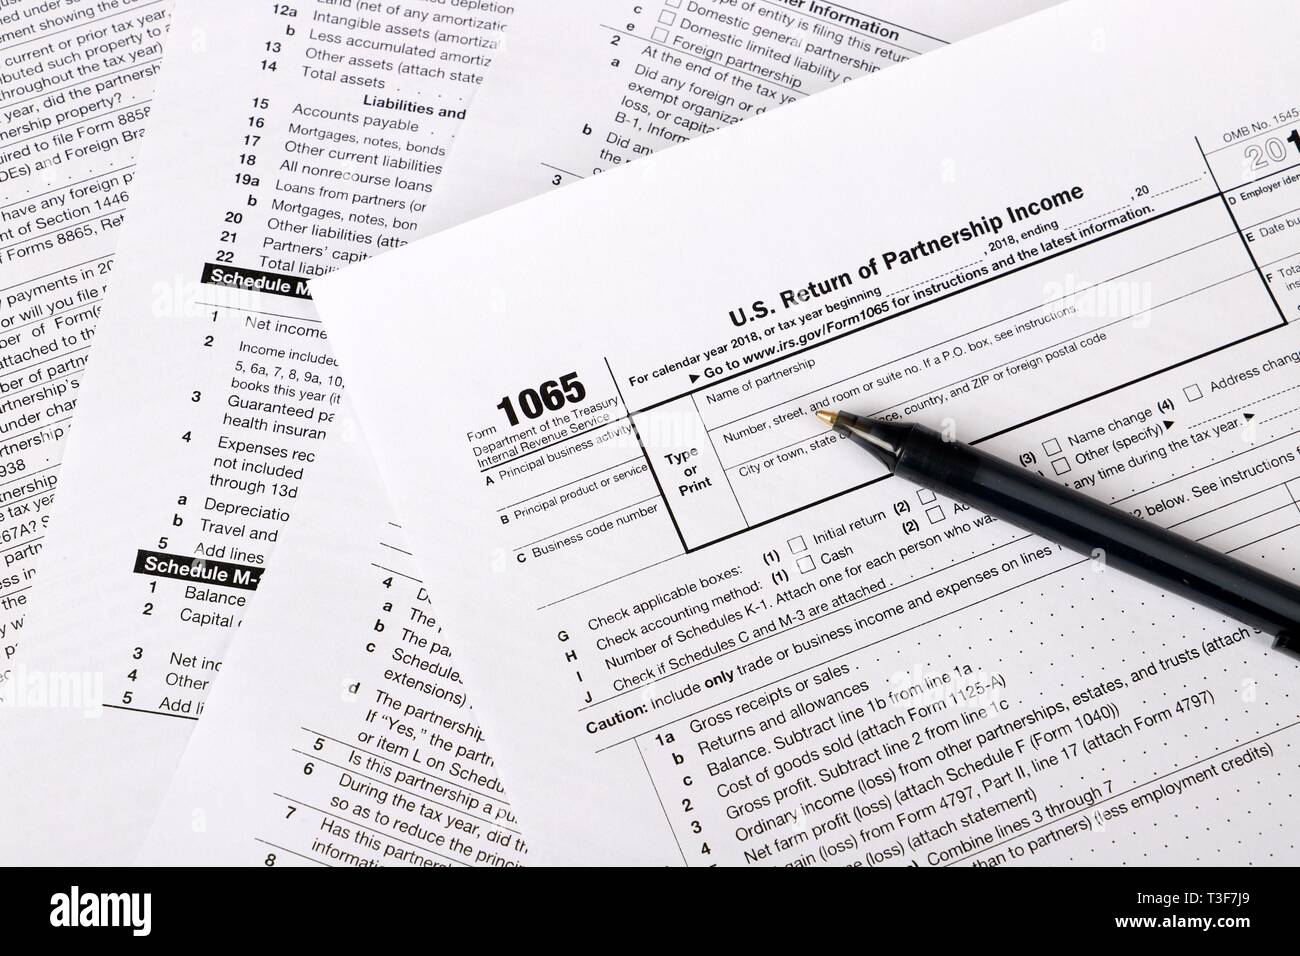 1065 tax form and pen on a Table - US Return for parentship income Stock Photo